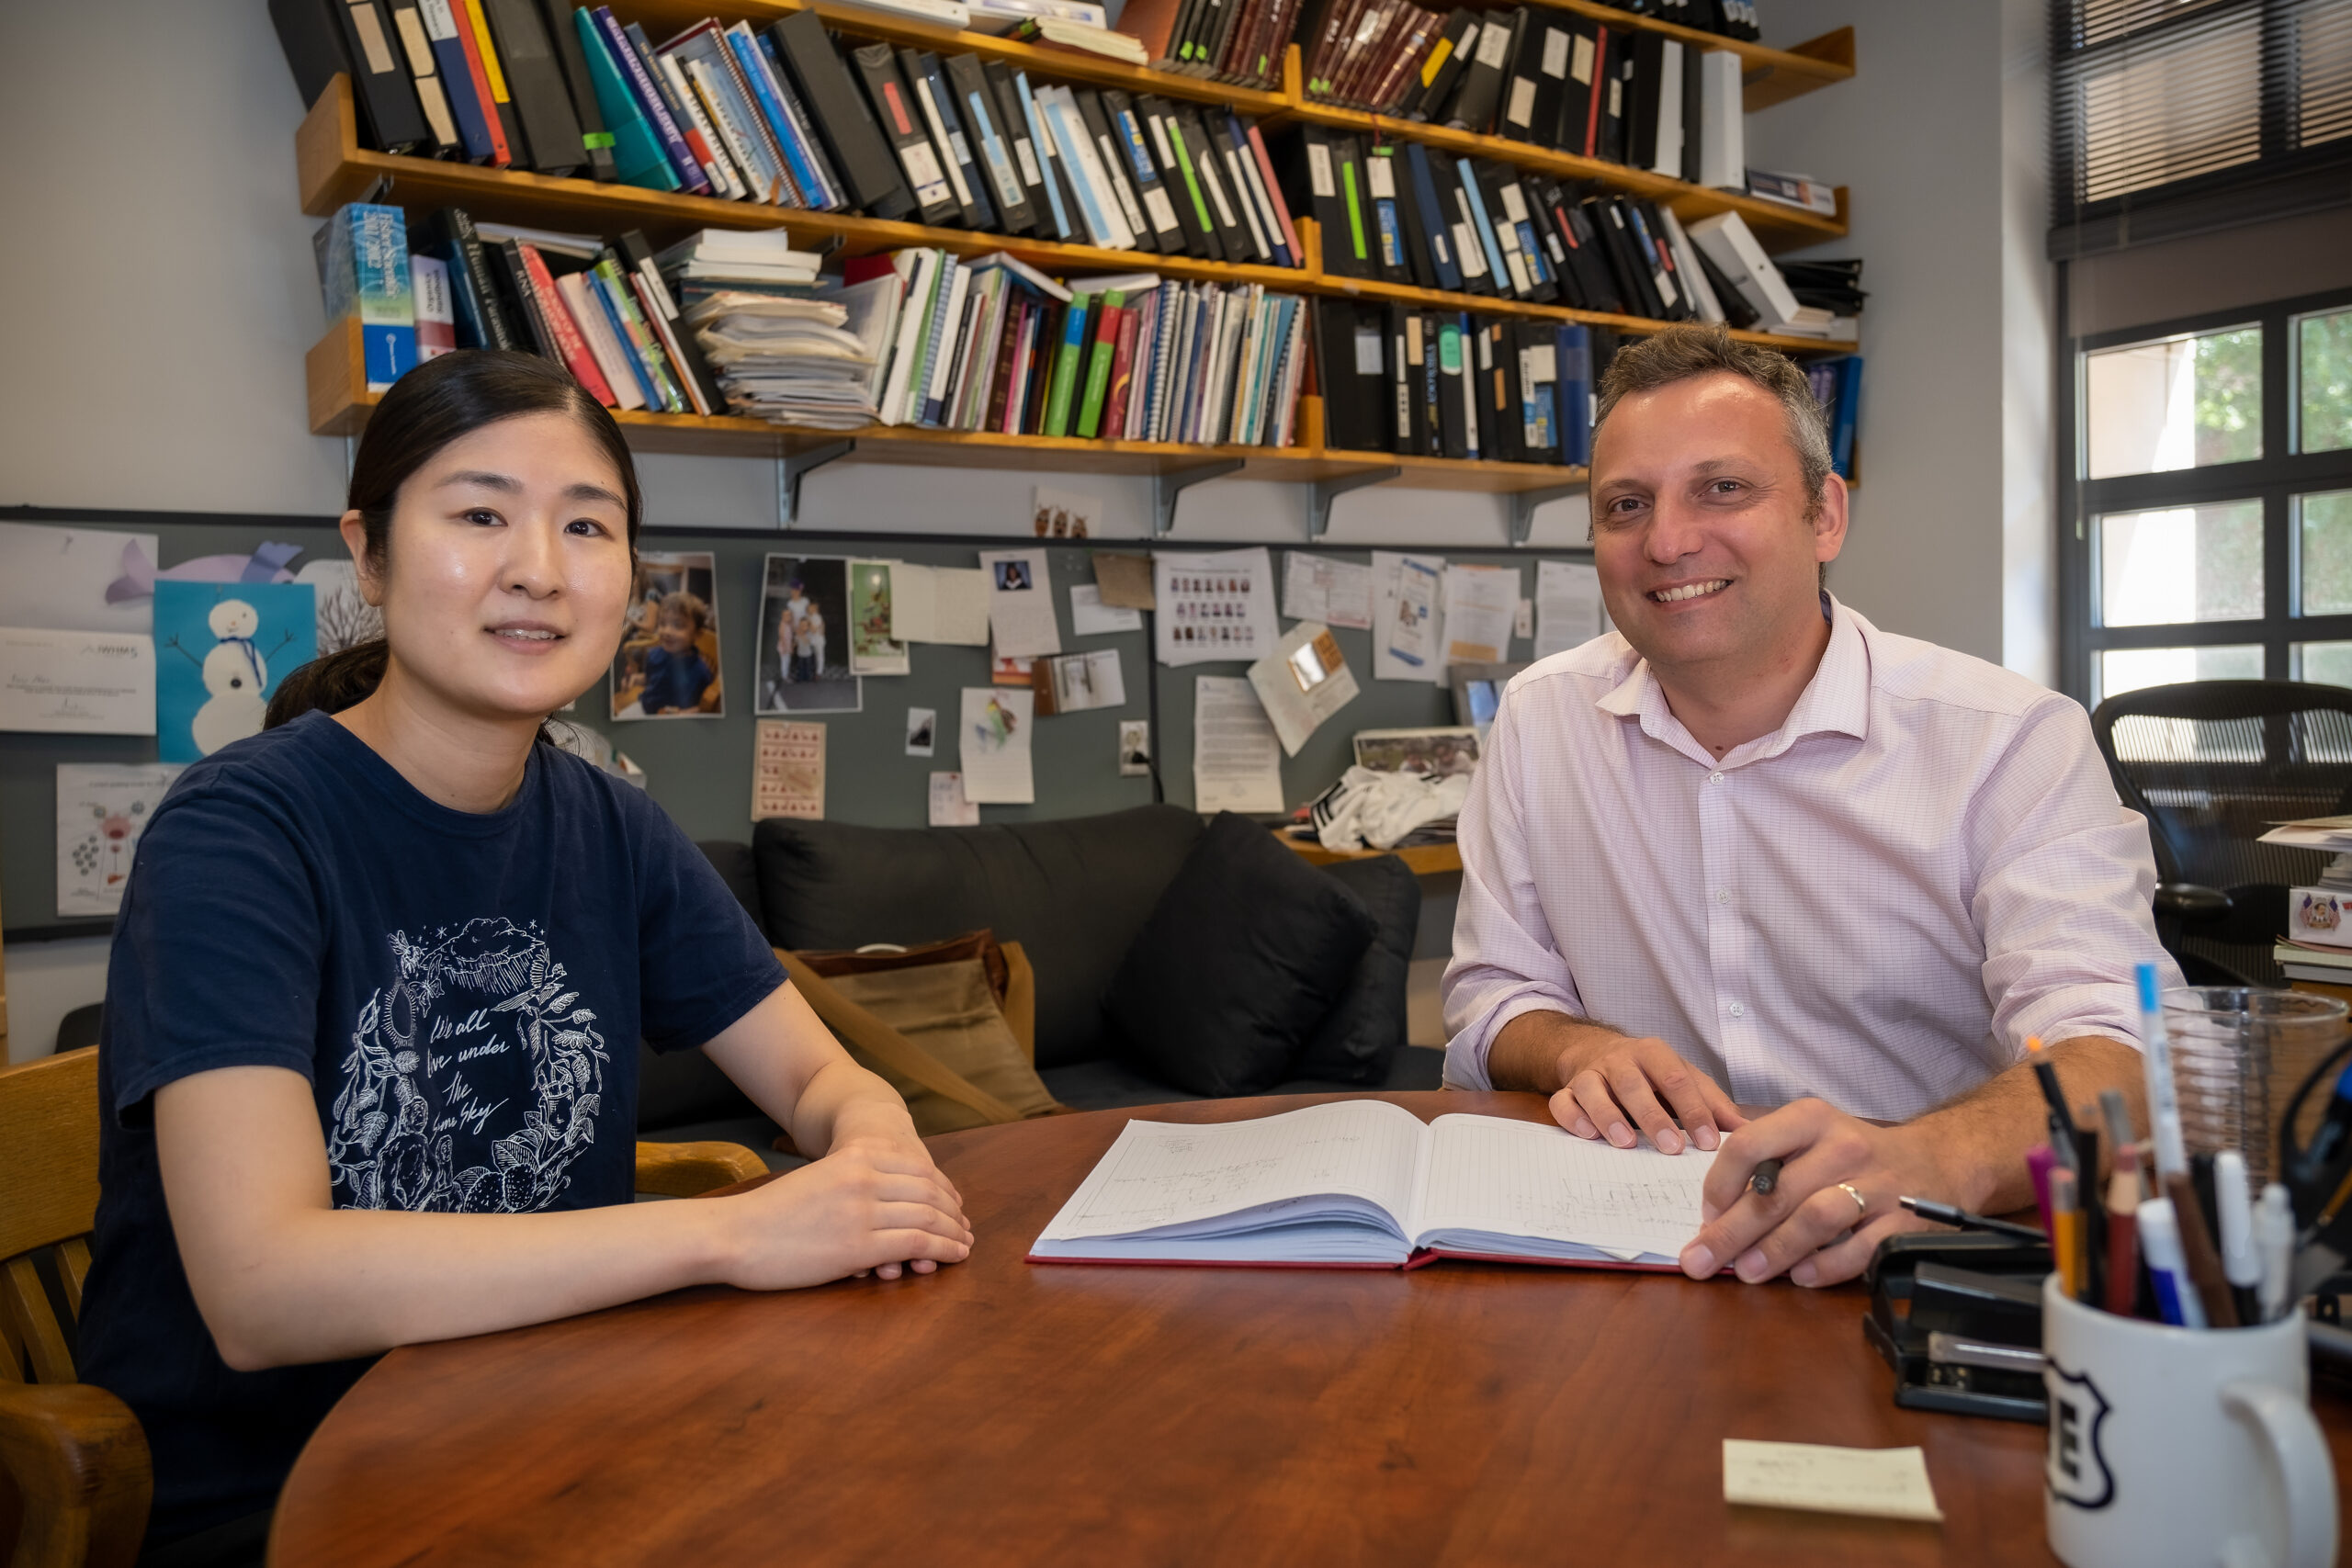 Saori Suzuki, a postdoc in the Ploss Lab and lead author on the JACS paper; and Alexander Ploss, professor of Molecular Biology.